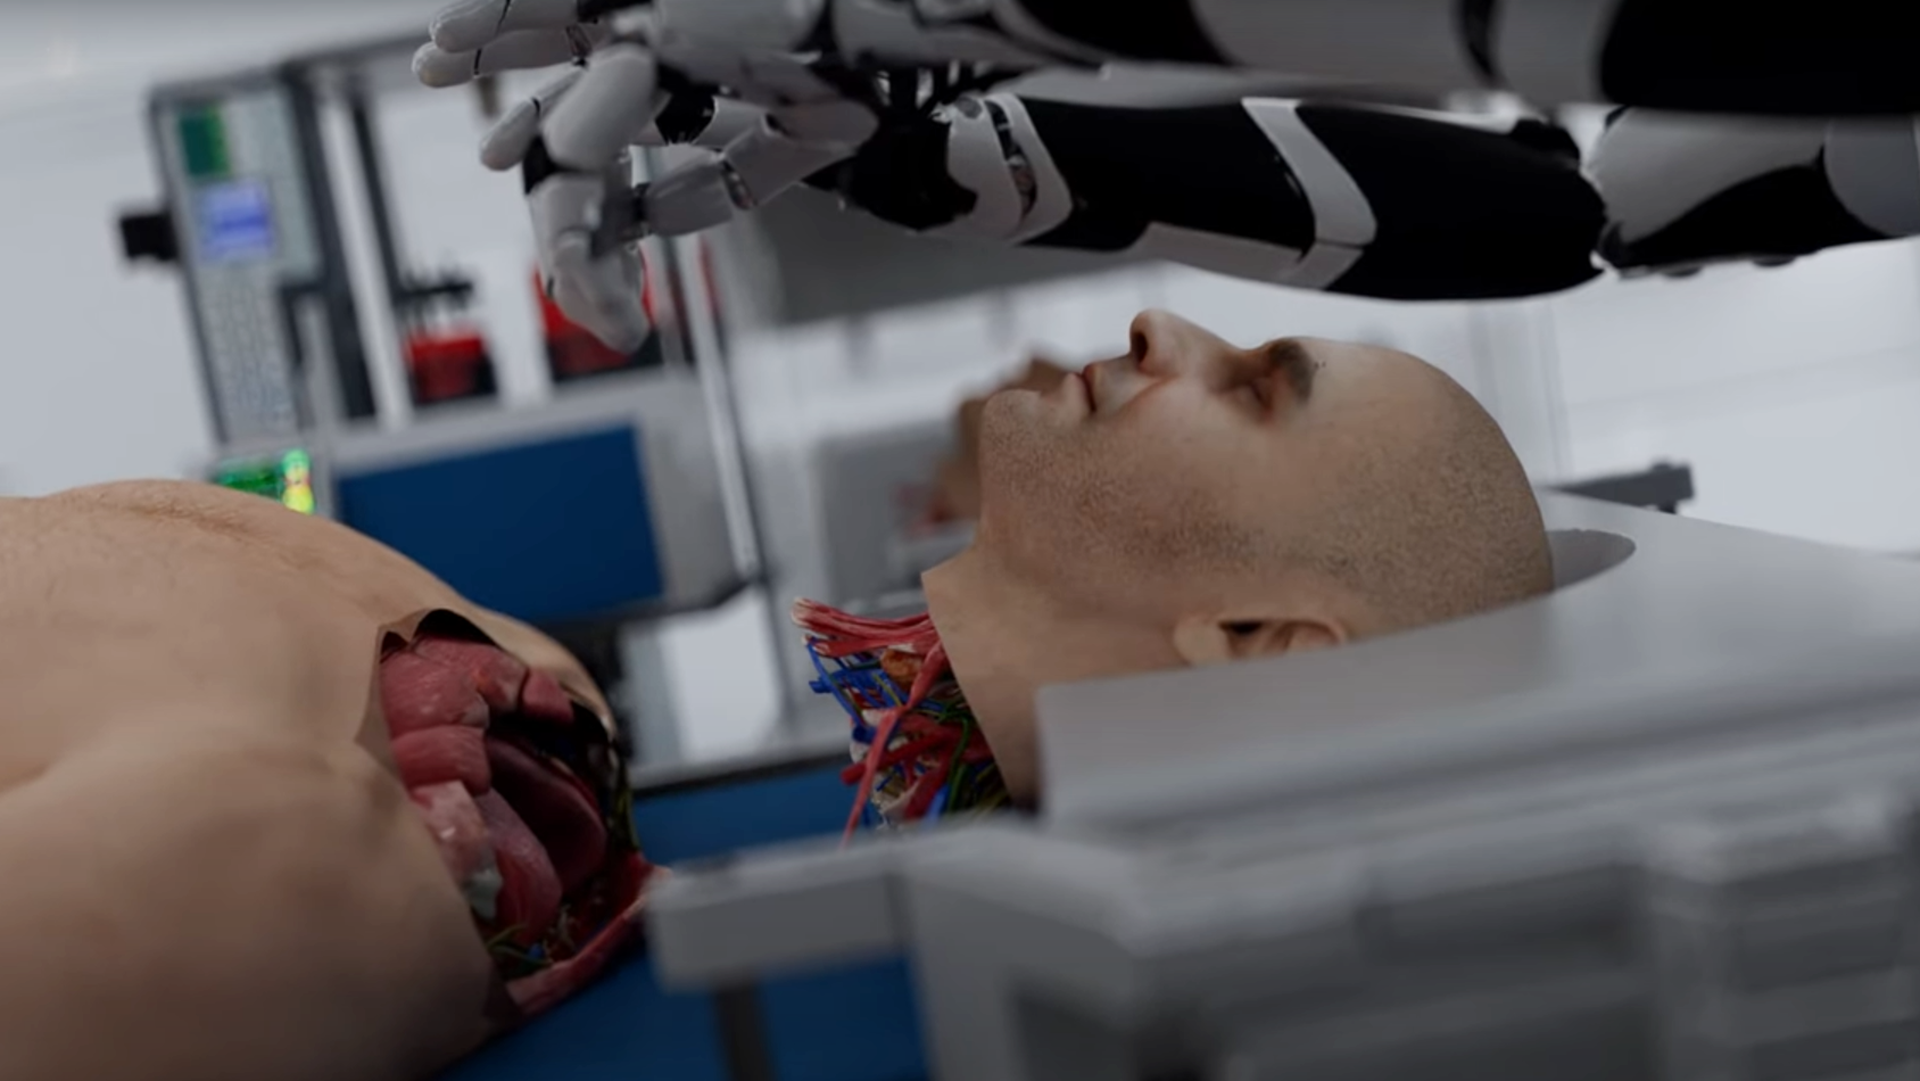 screenshot from a video with anthropomorphic robot arms hovering over a human head detached from the body, lying on a surgical table